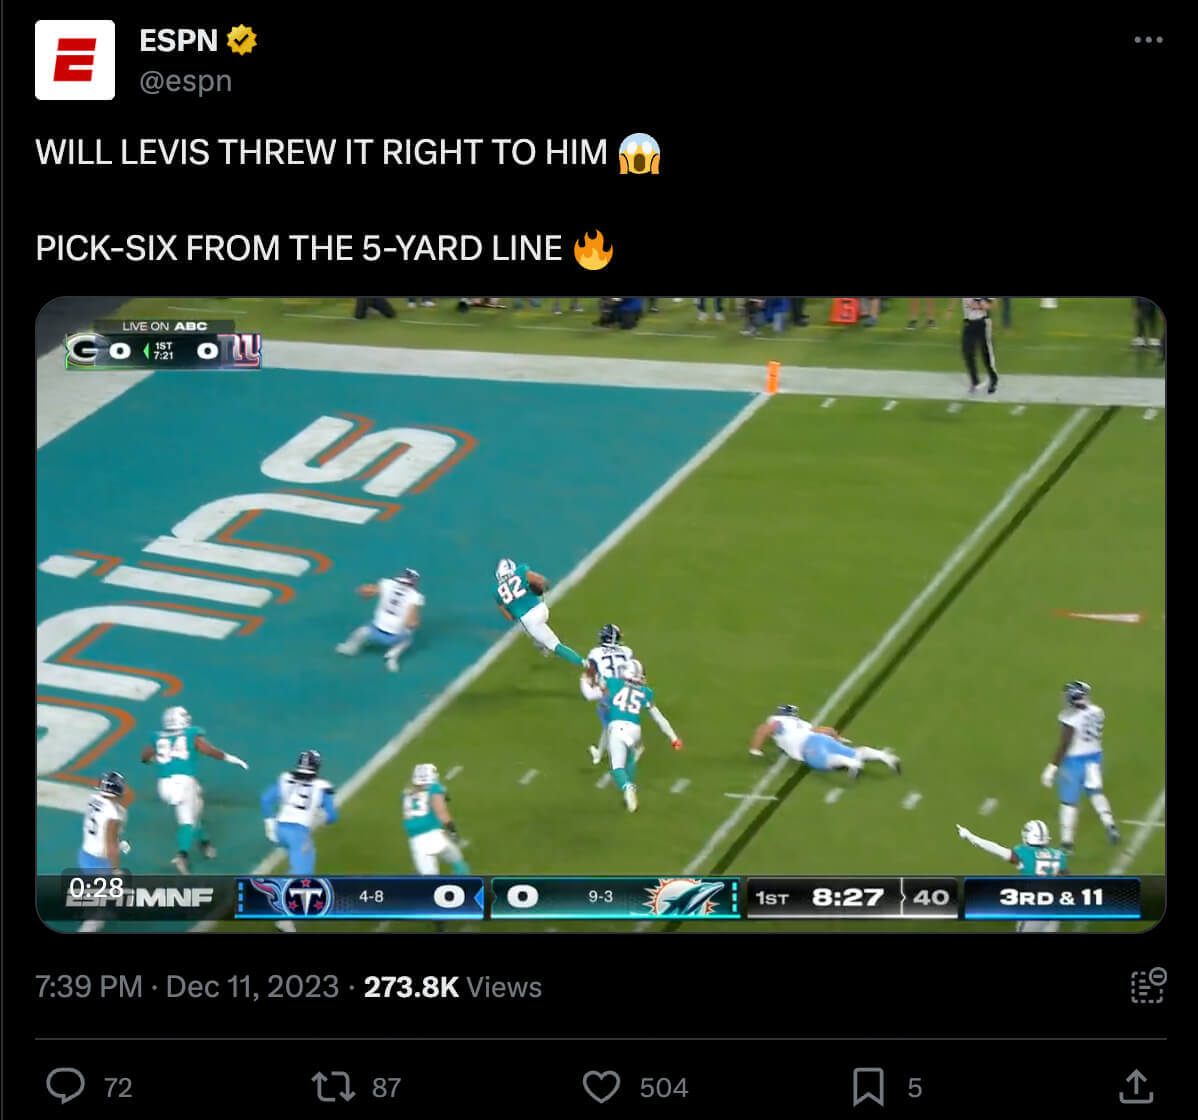 Post about a pick-six for the Dolphins